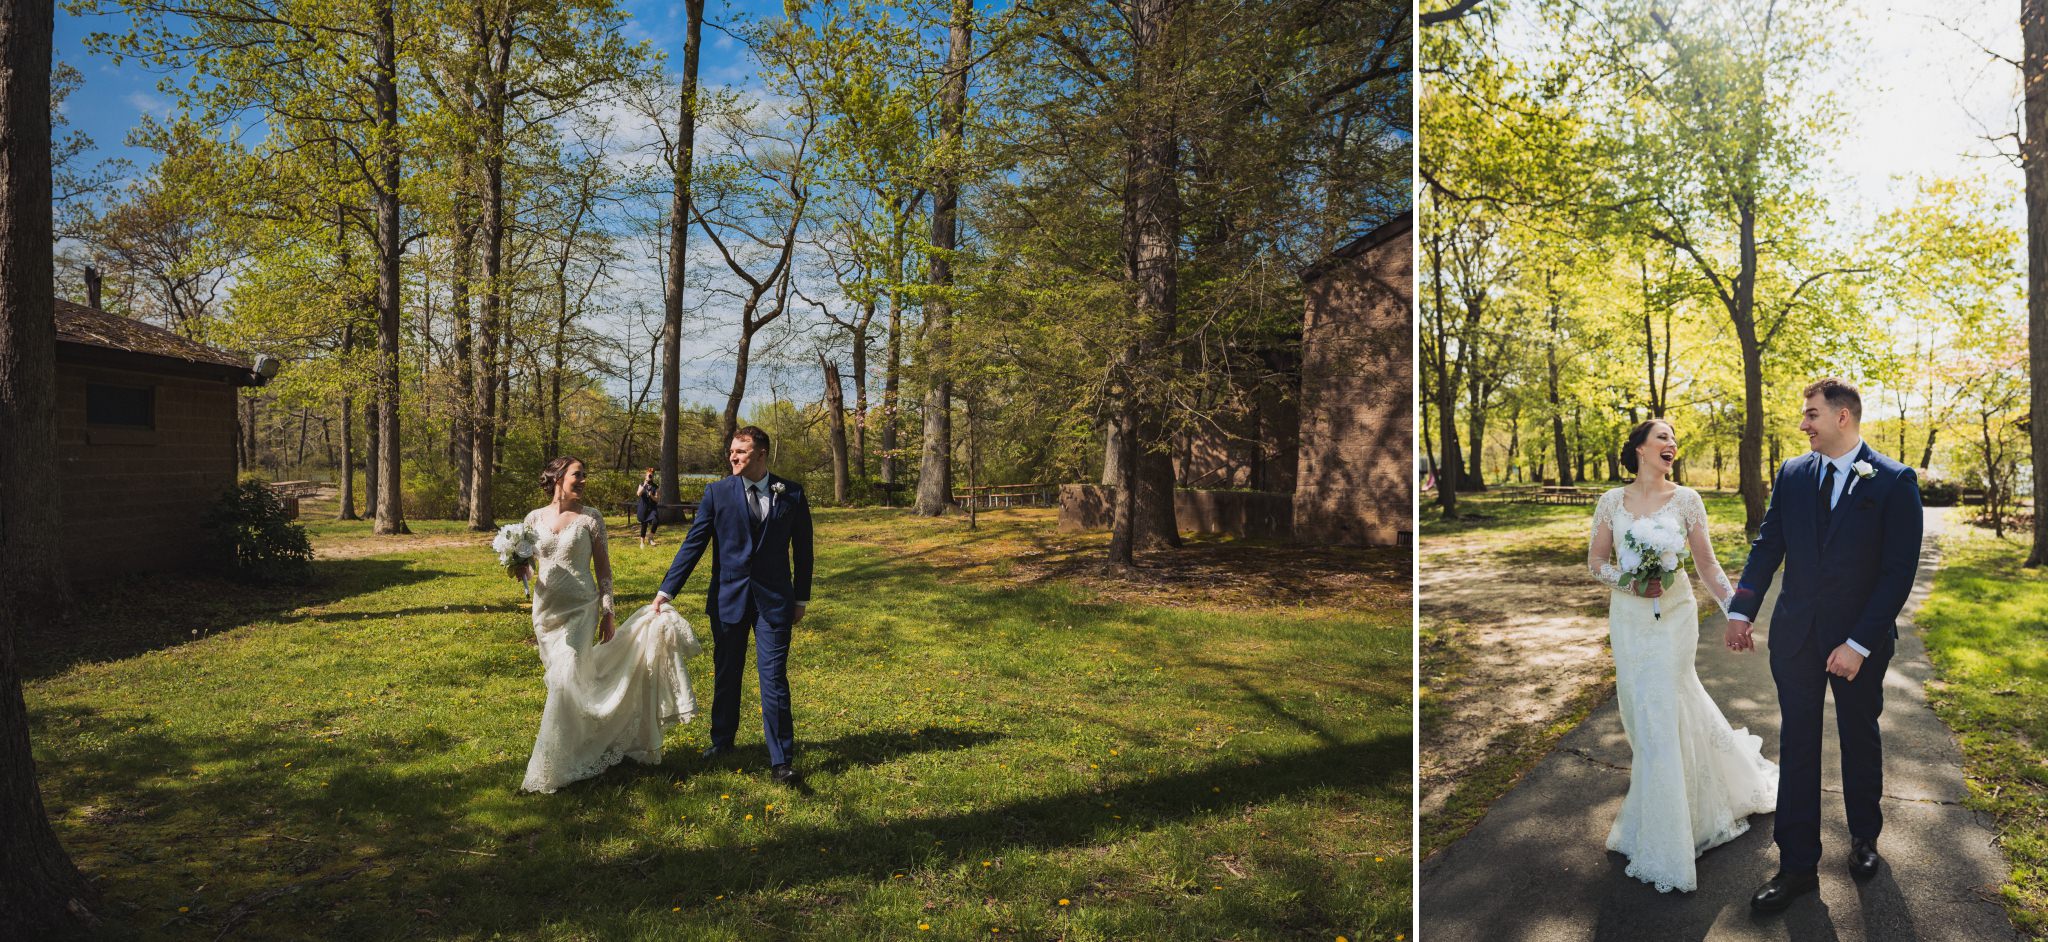  Photos taken during Luke and Kelly's wedding in New Jersey. photographed with a photojournalistic style and with story telling in mind.  